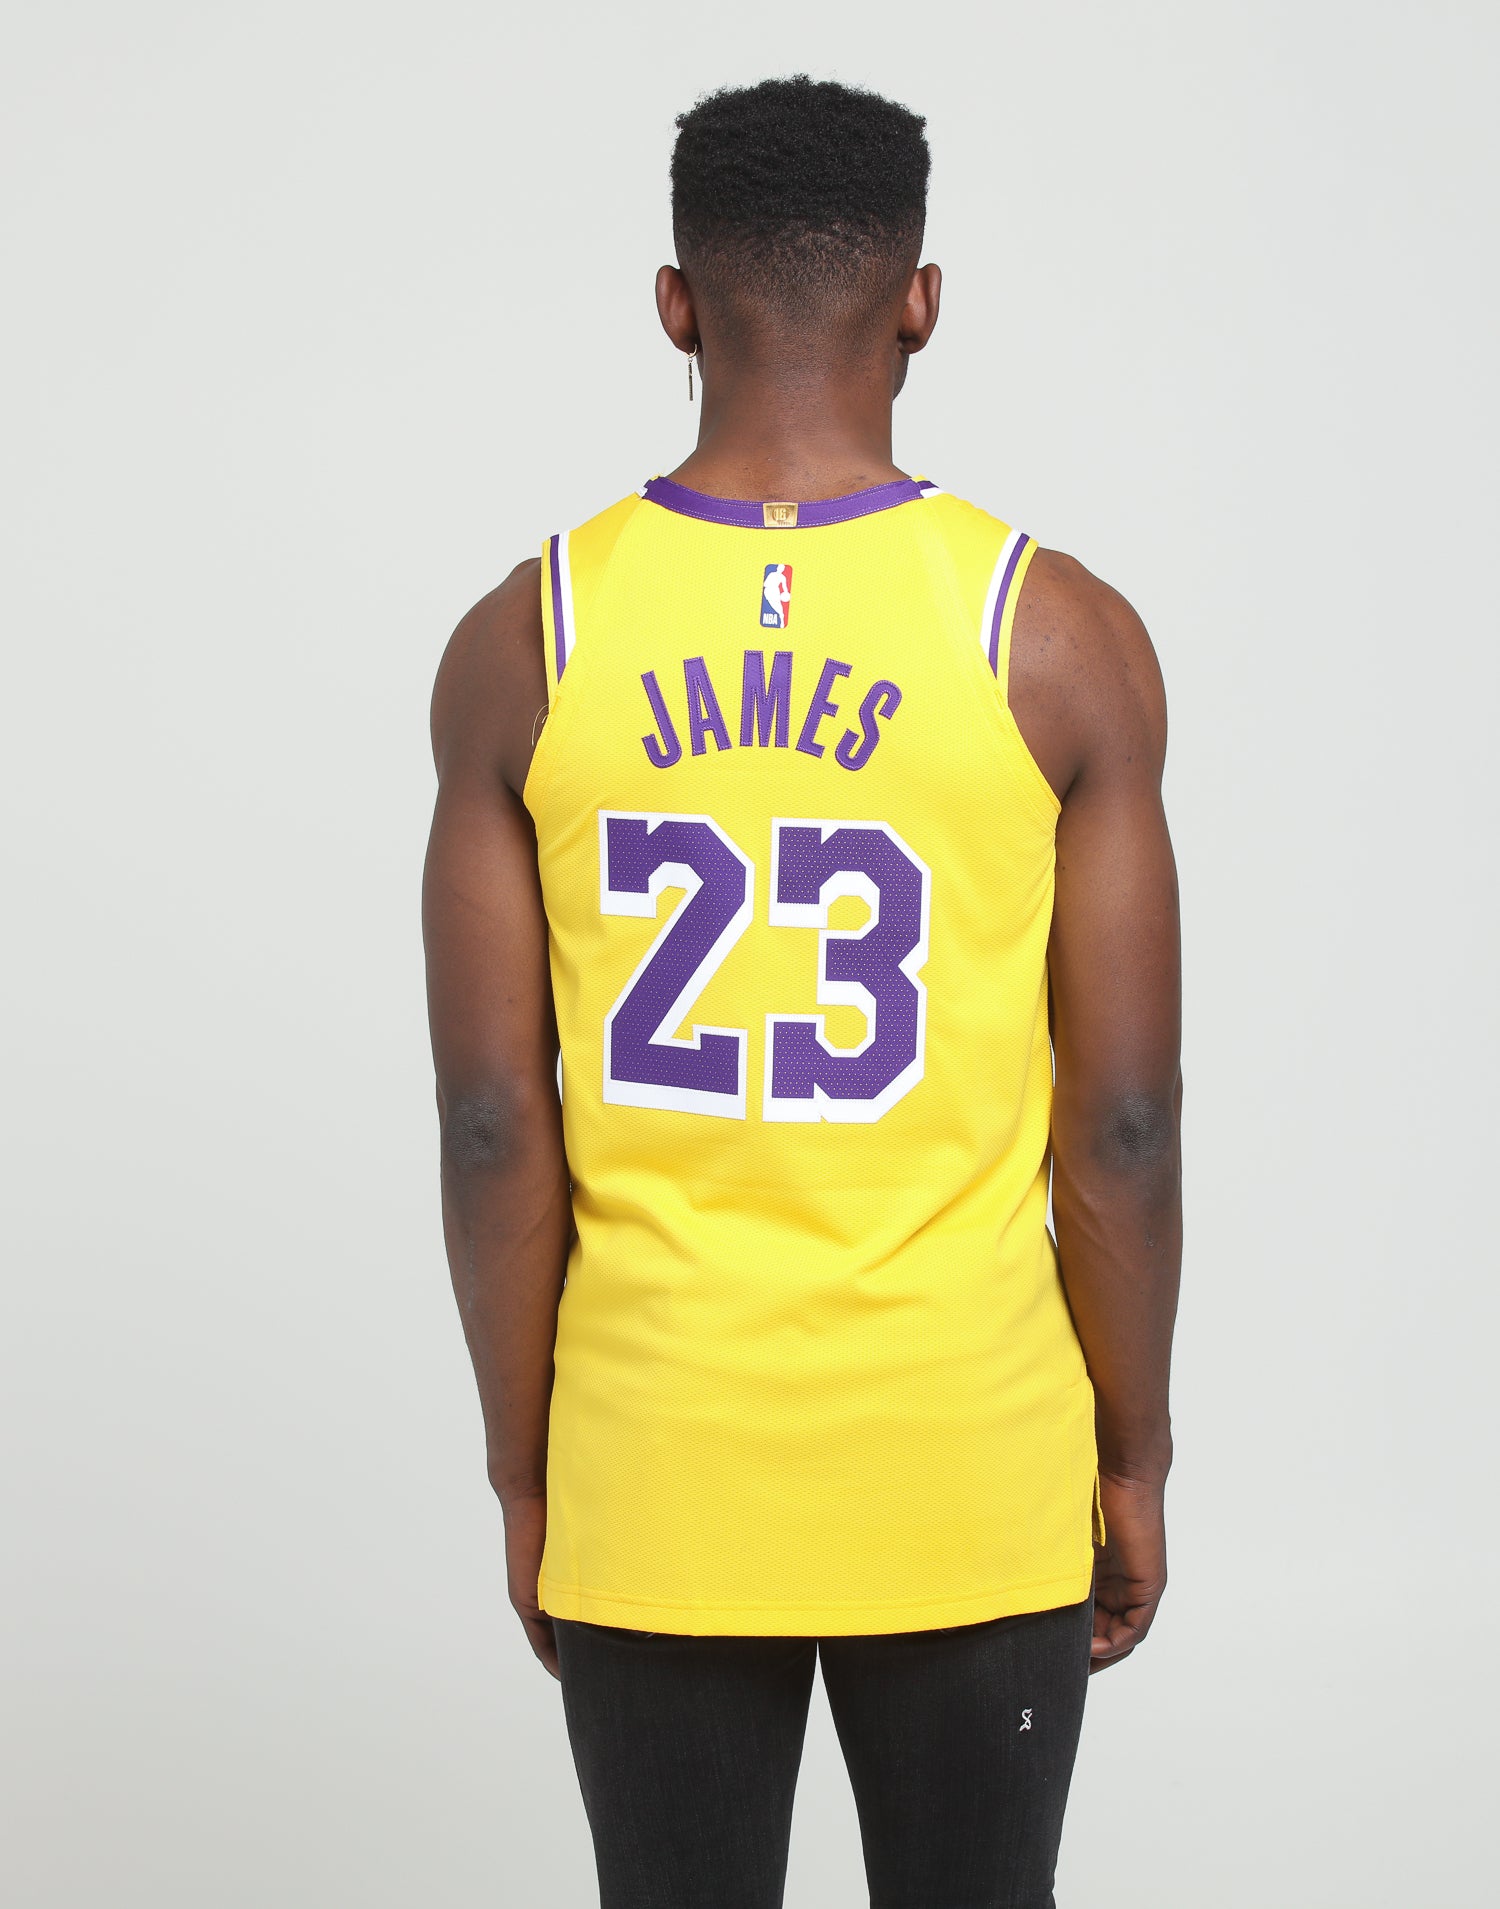 lakers authentic lebron james jersey